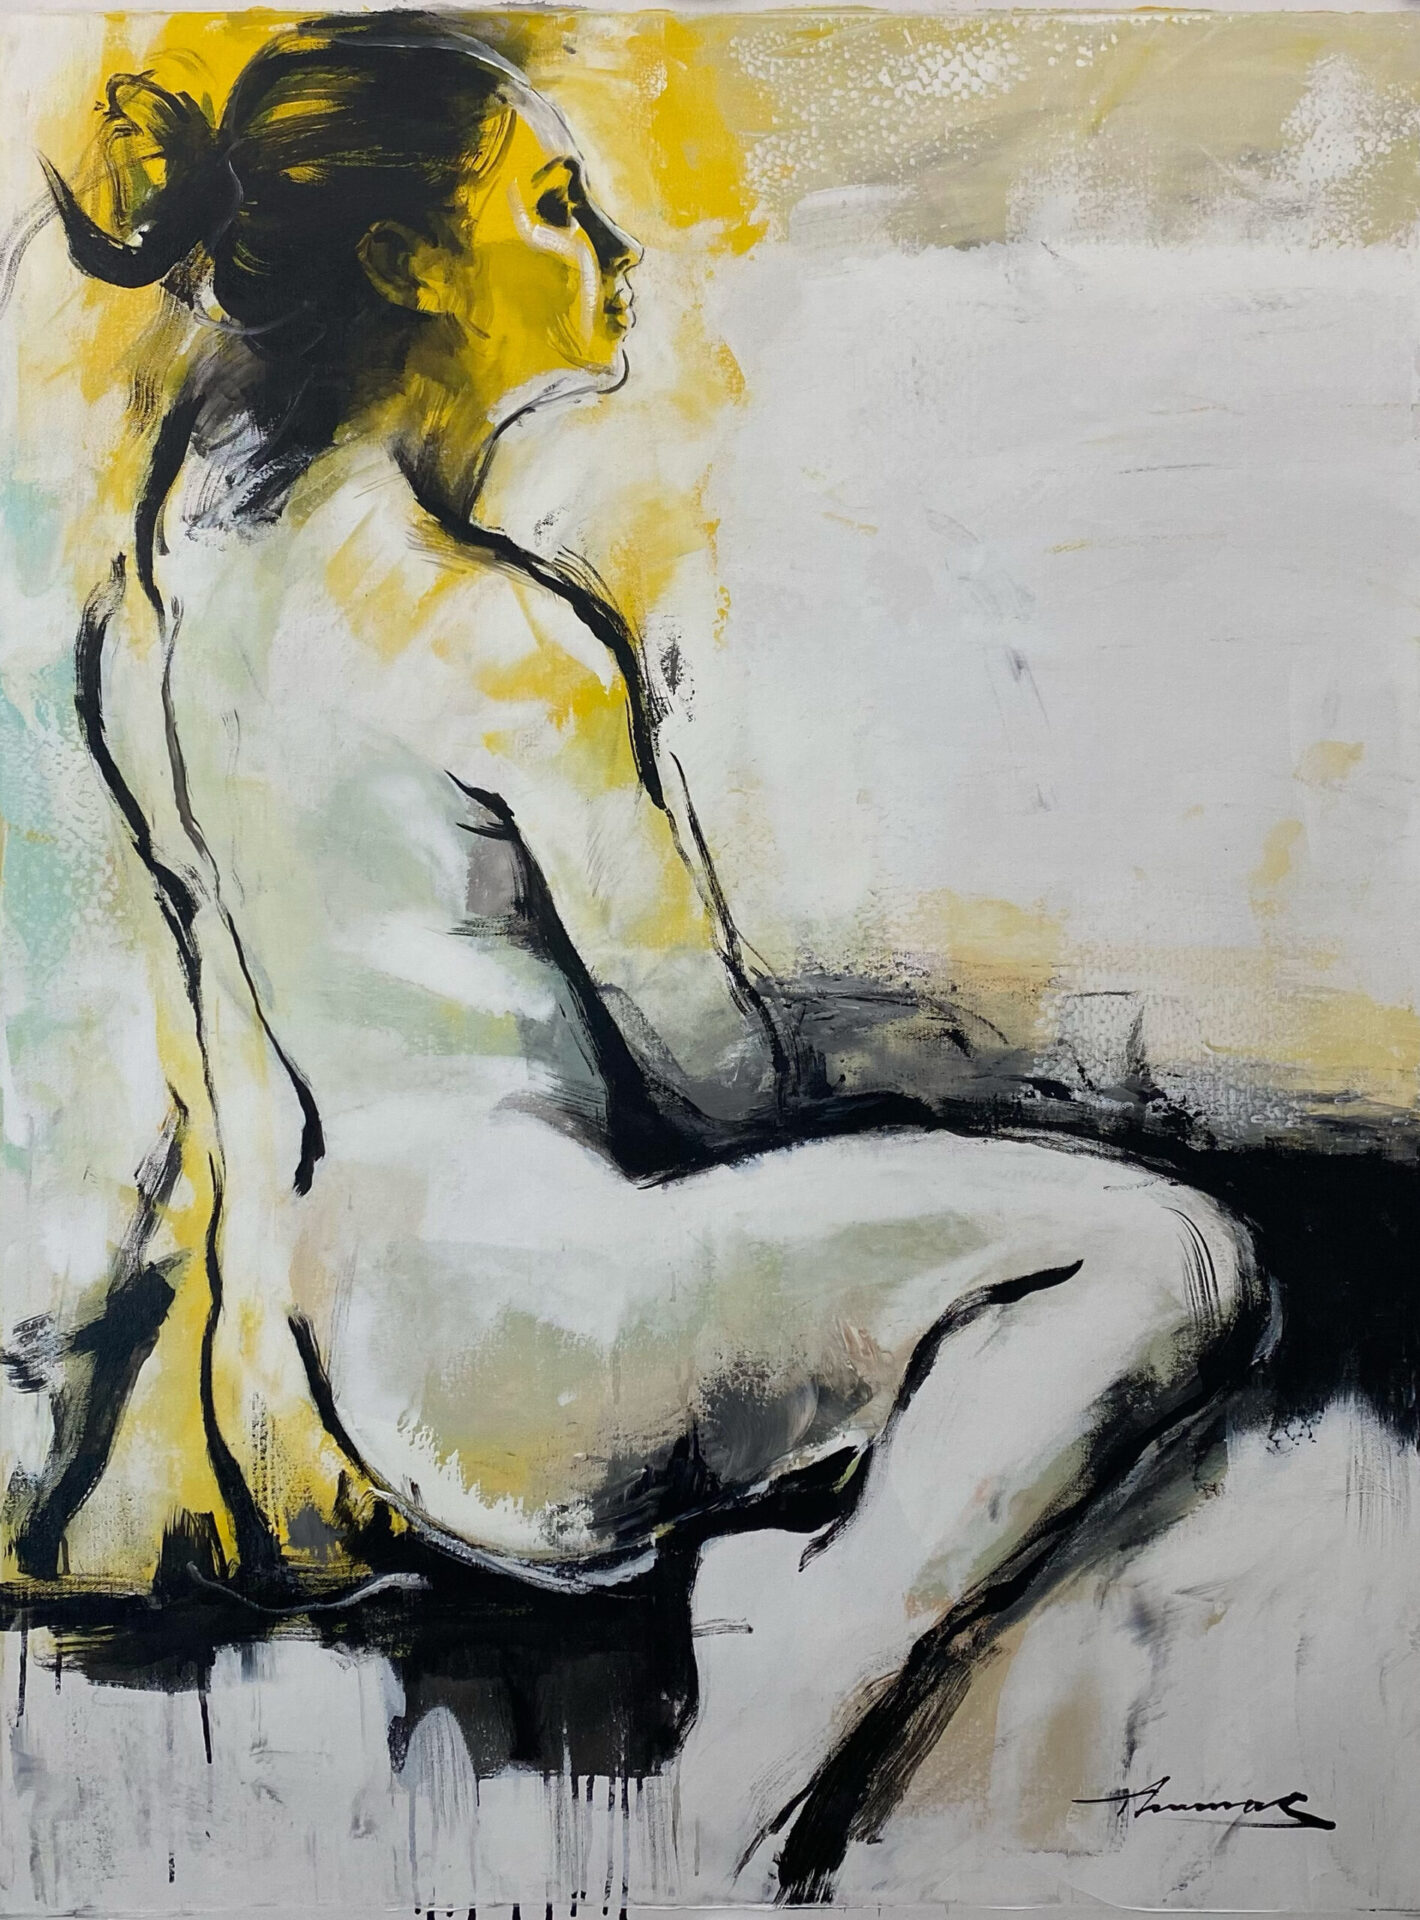 Image of a painting depicting a raw and sensual female nude, with bold strokes and lines capturing her essence with confidence and sophistication